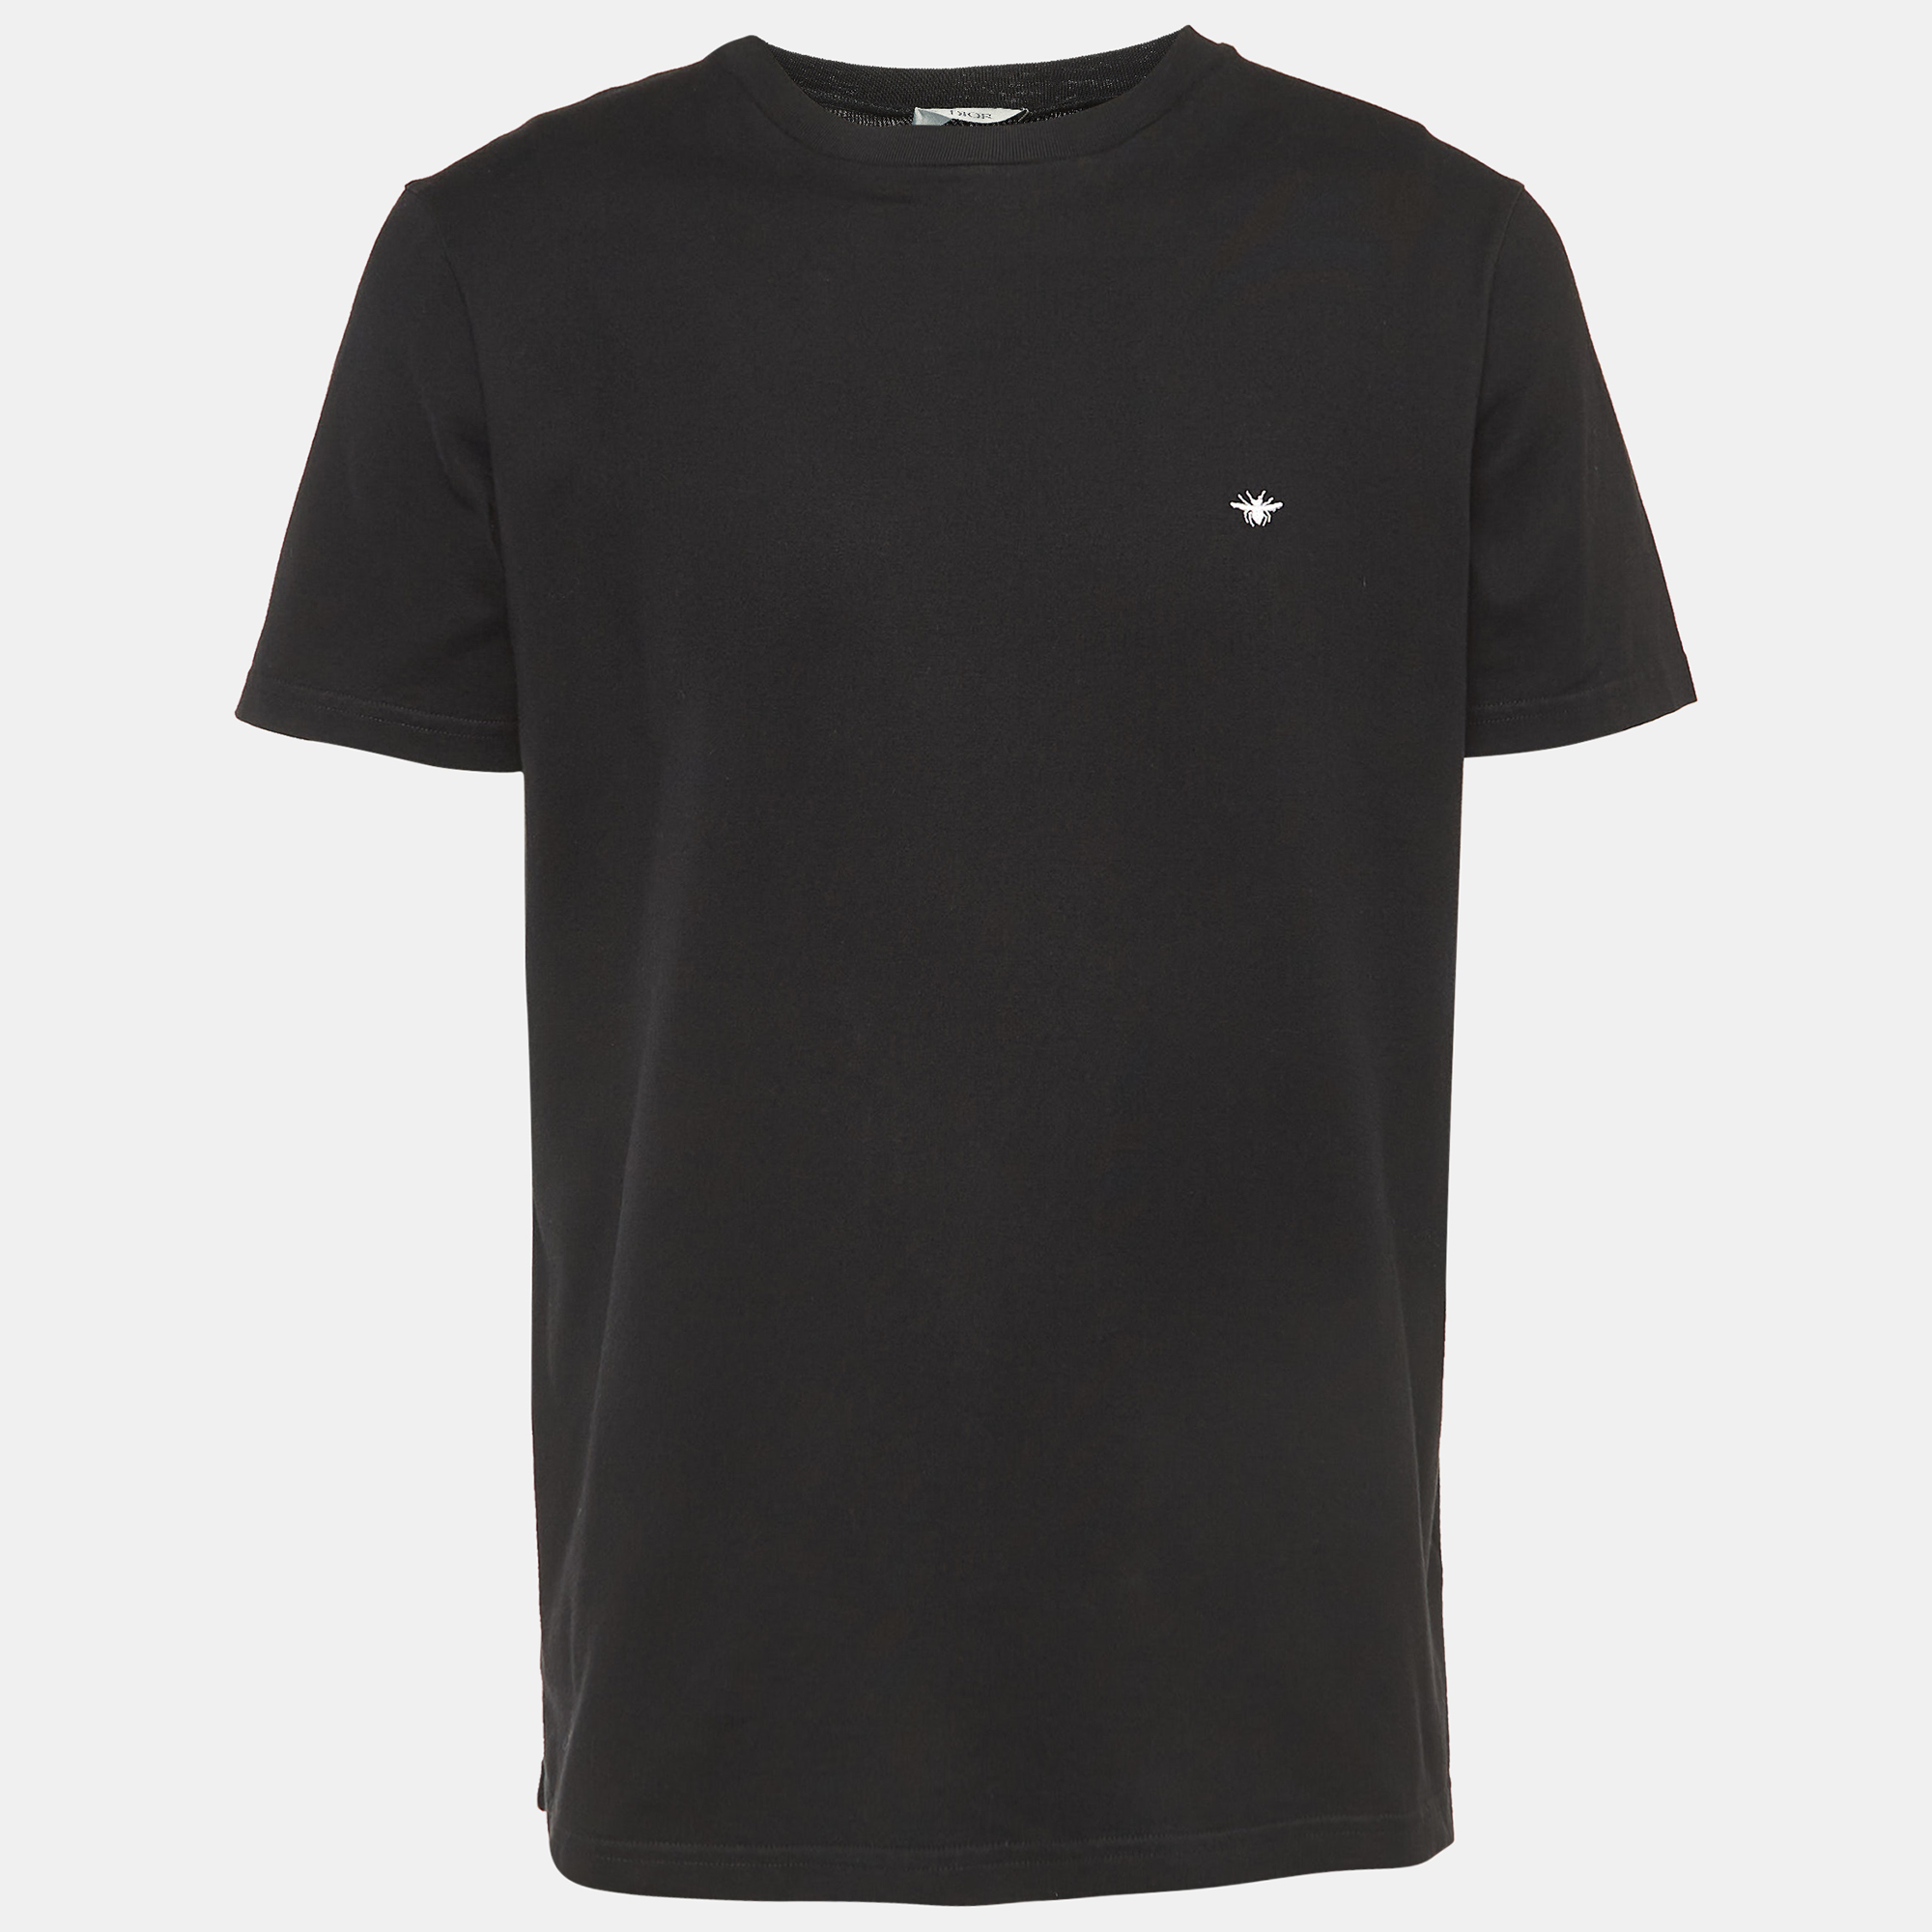 Dior Homme Black Bee Embroidered Cotton Half Sleeve T-Shirt L